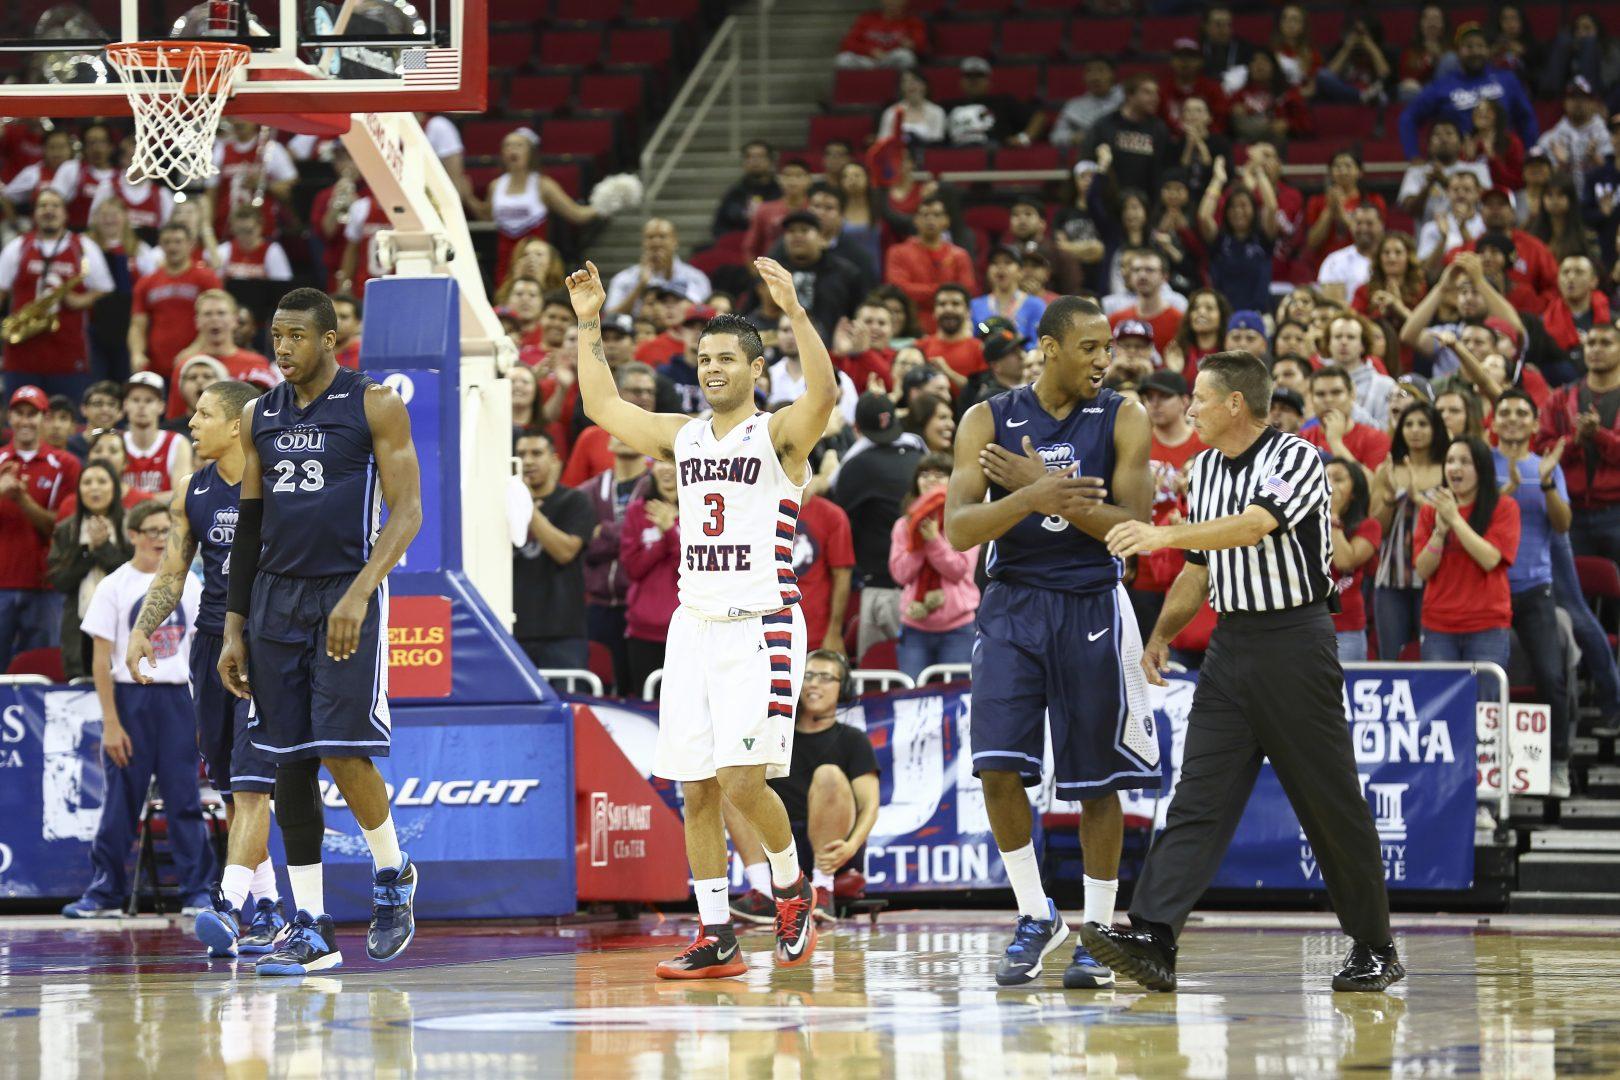 Fresno+State+guard+Cezar+Guerrero+celebrates+with+the+crowd+toward+the+end+of+the+Bulldogs+71-64+victory+over+Old+Dominion.+Photo+by+Matt+Vieira%2FThe+Collegian